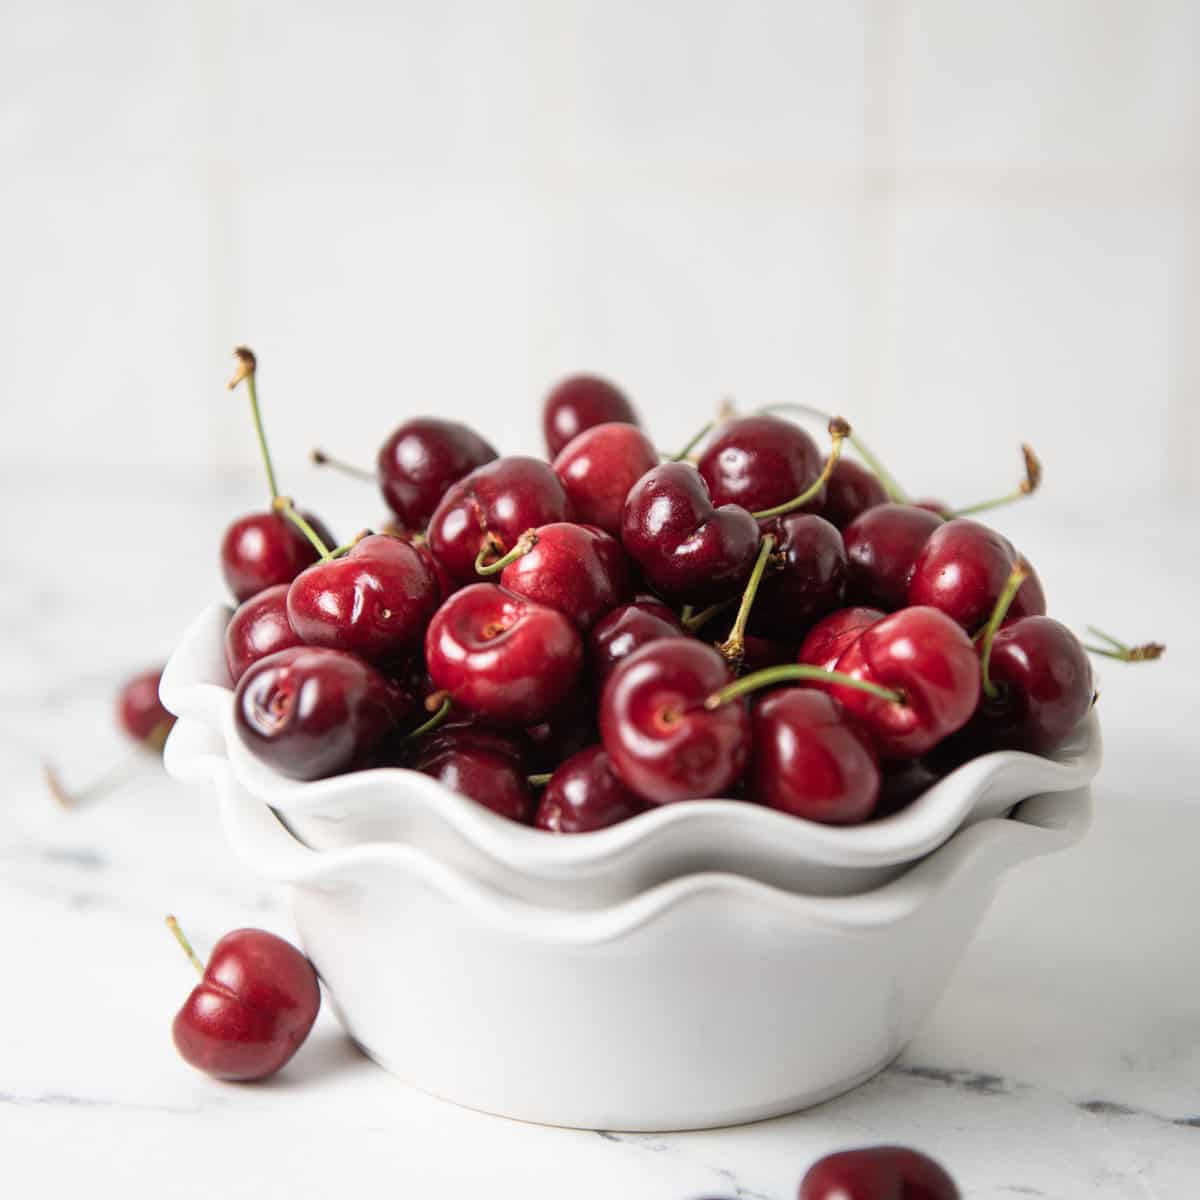 Cherries in a bowl on a counter.